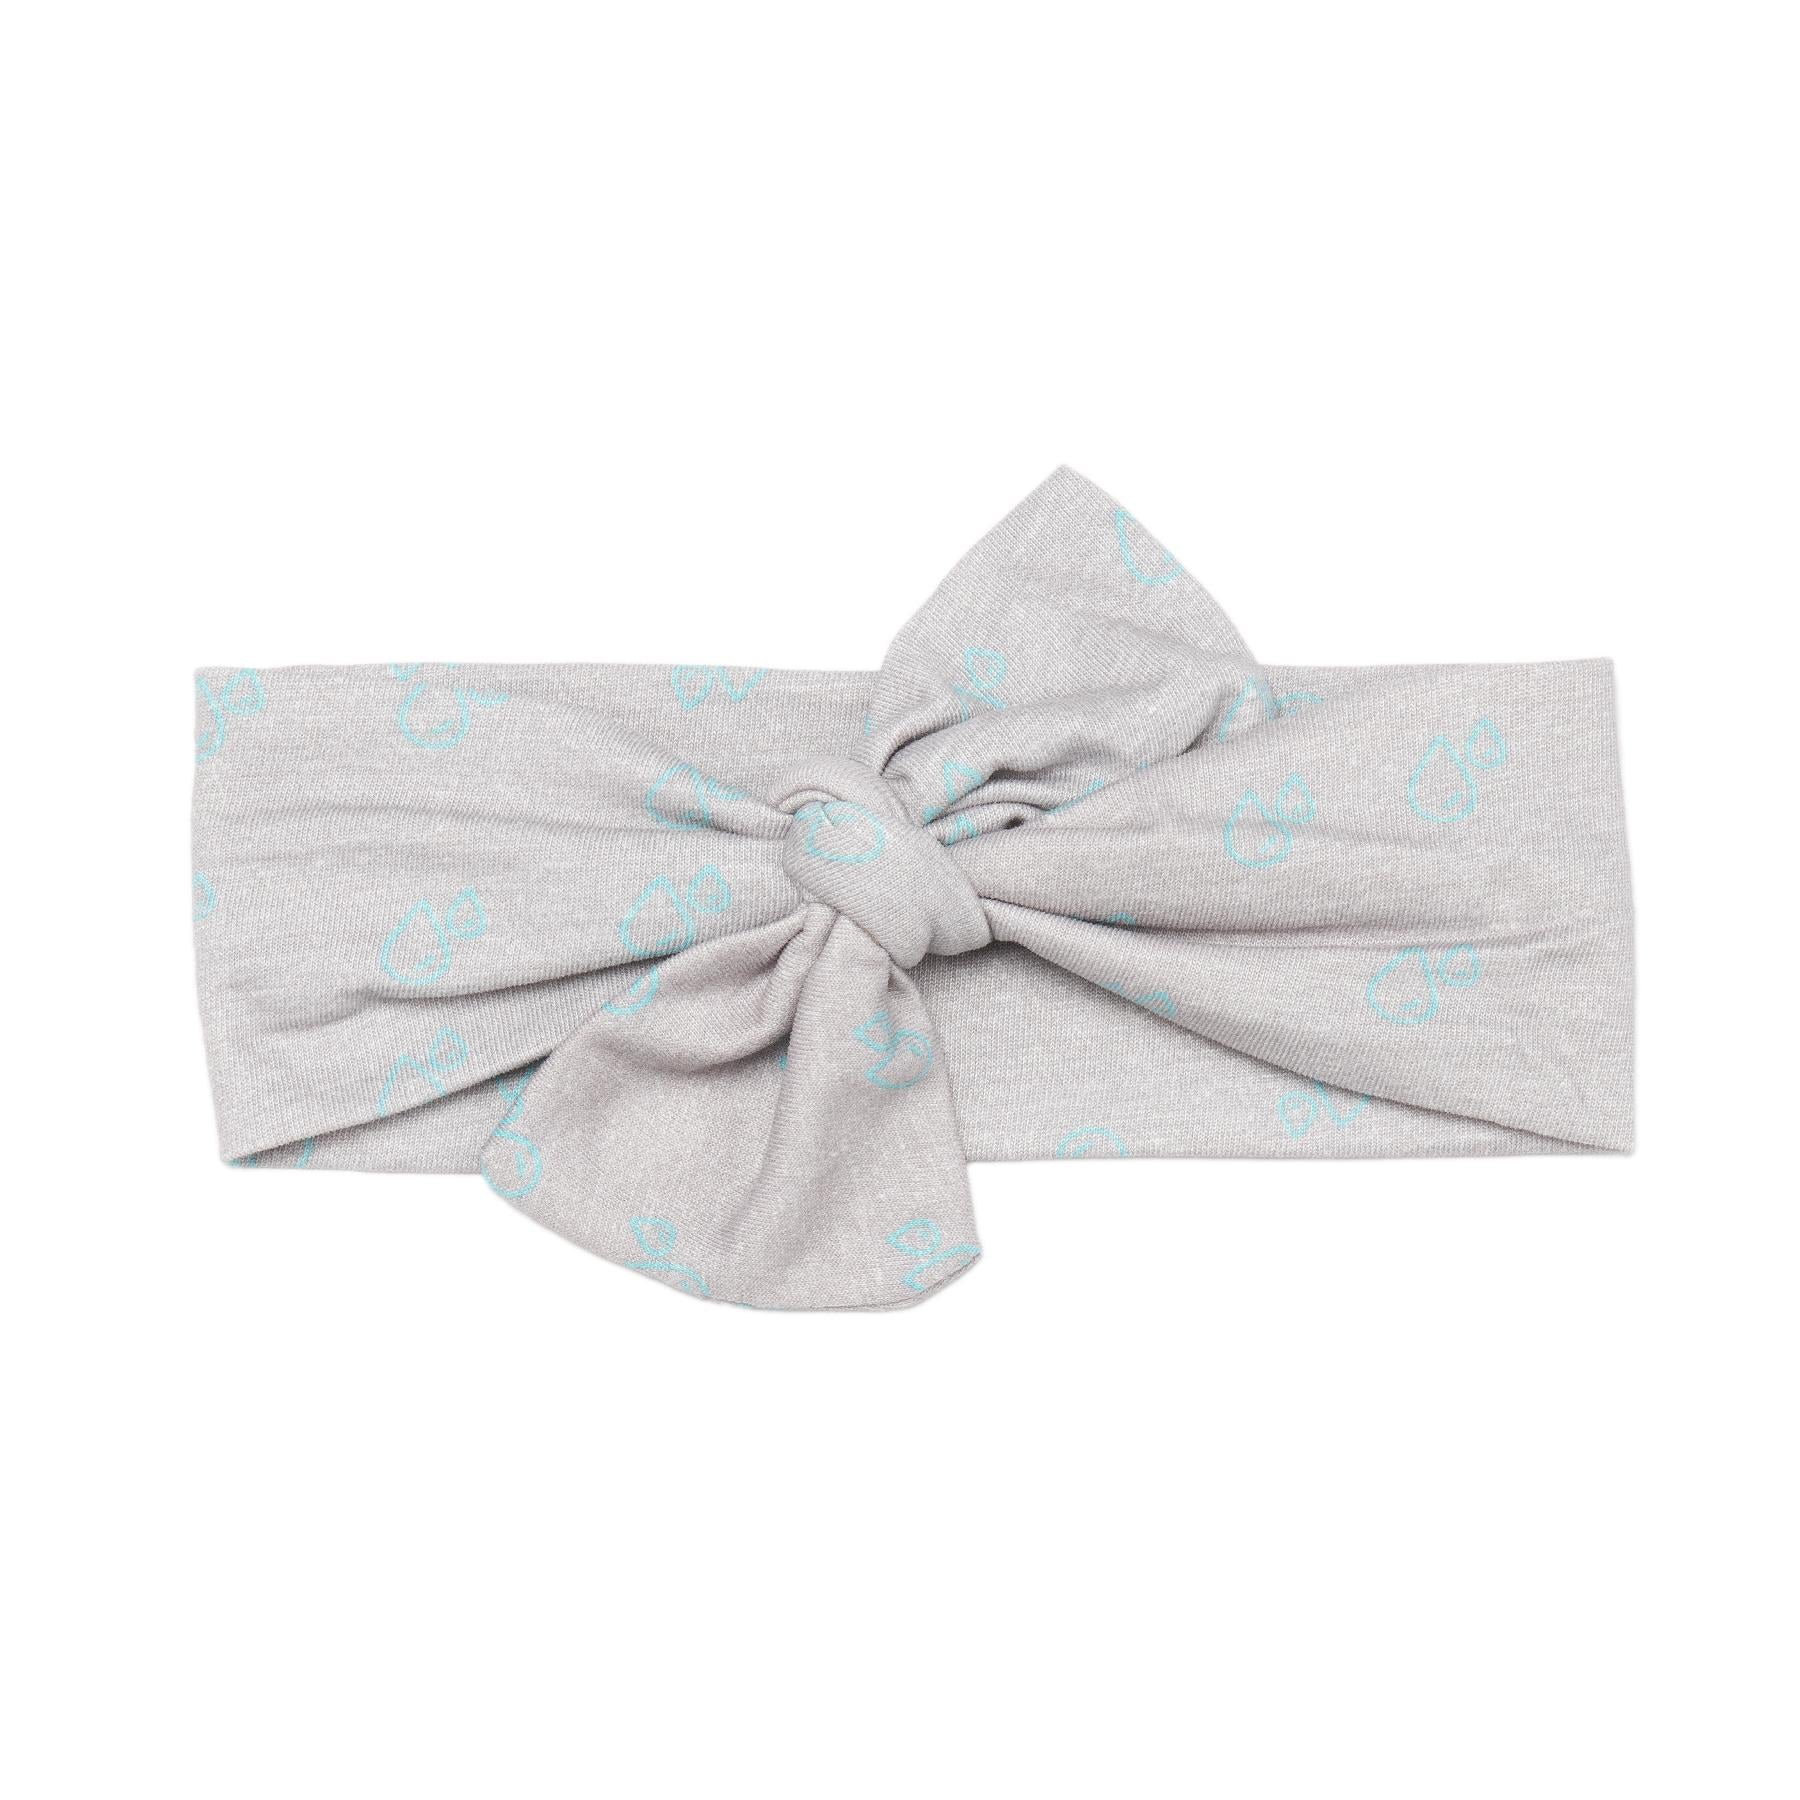 Patterned Organic Cotton Fabric Baby Hair Band Gray